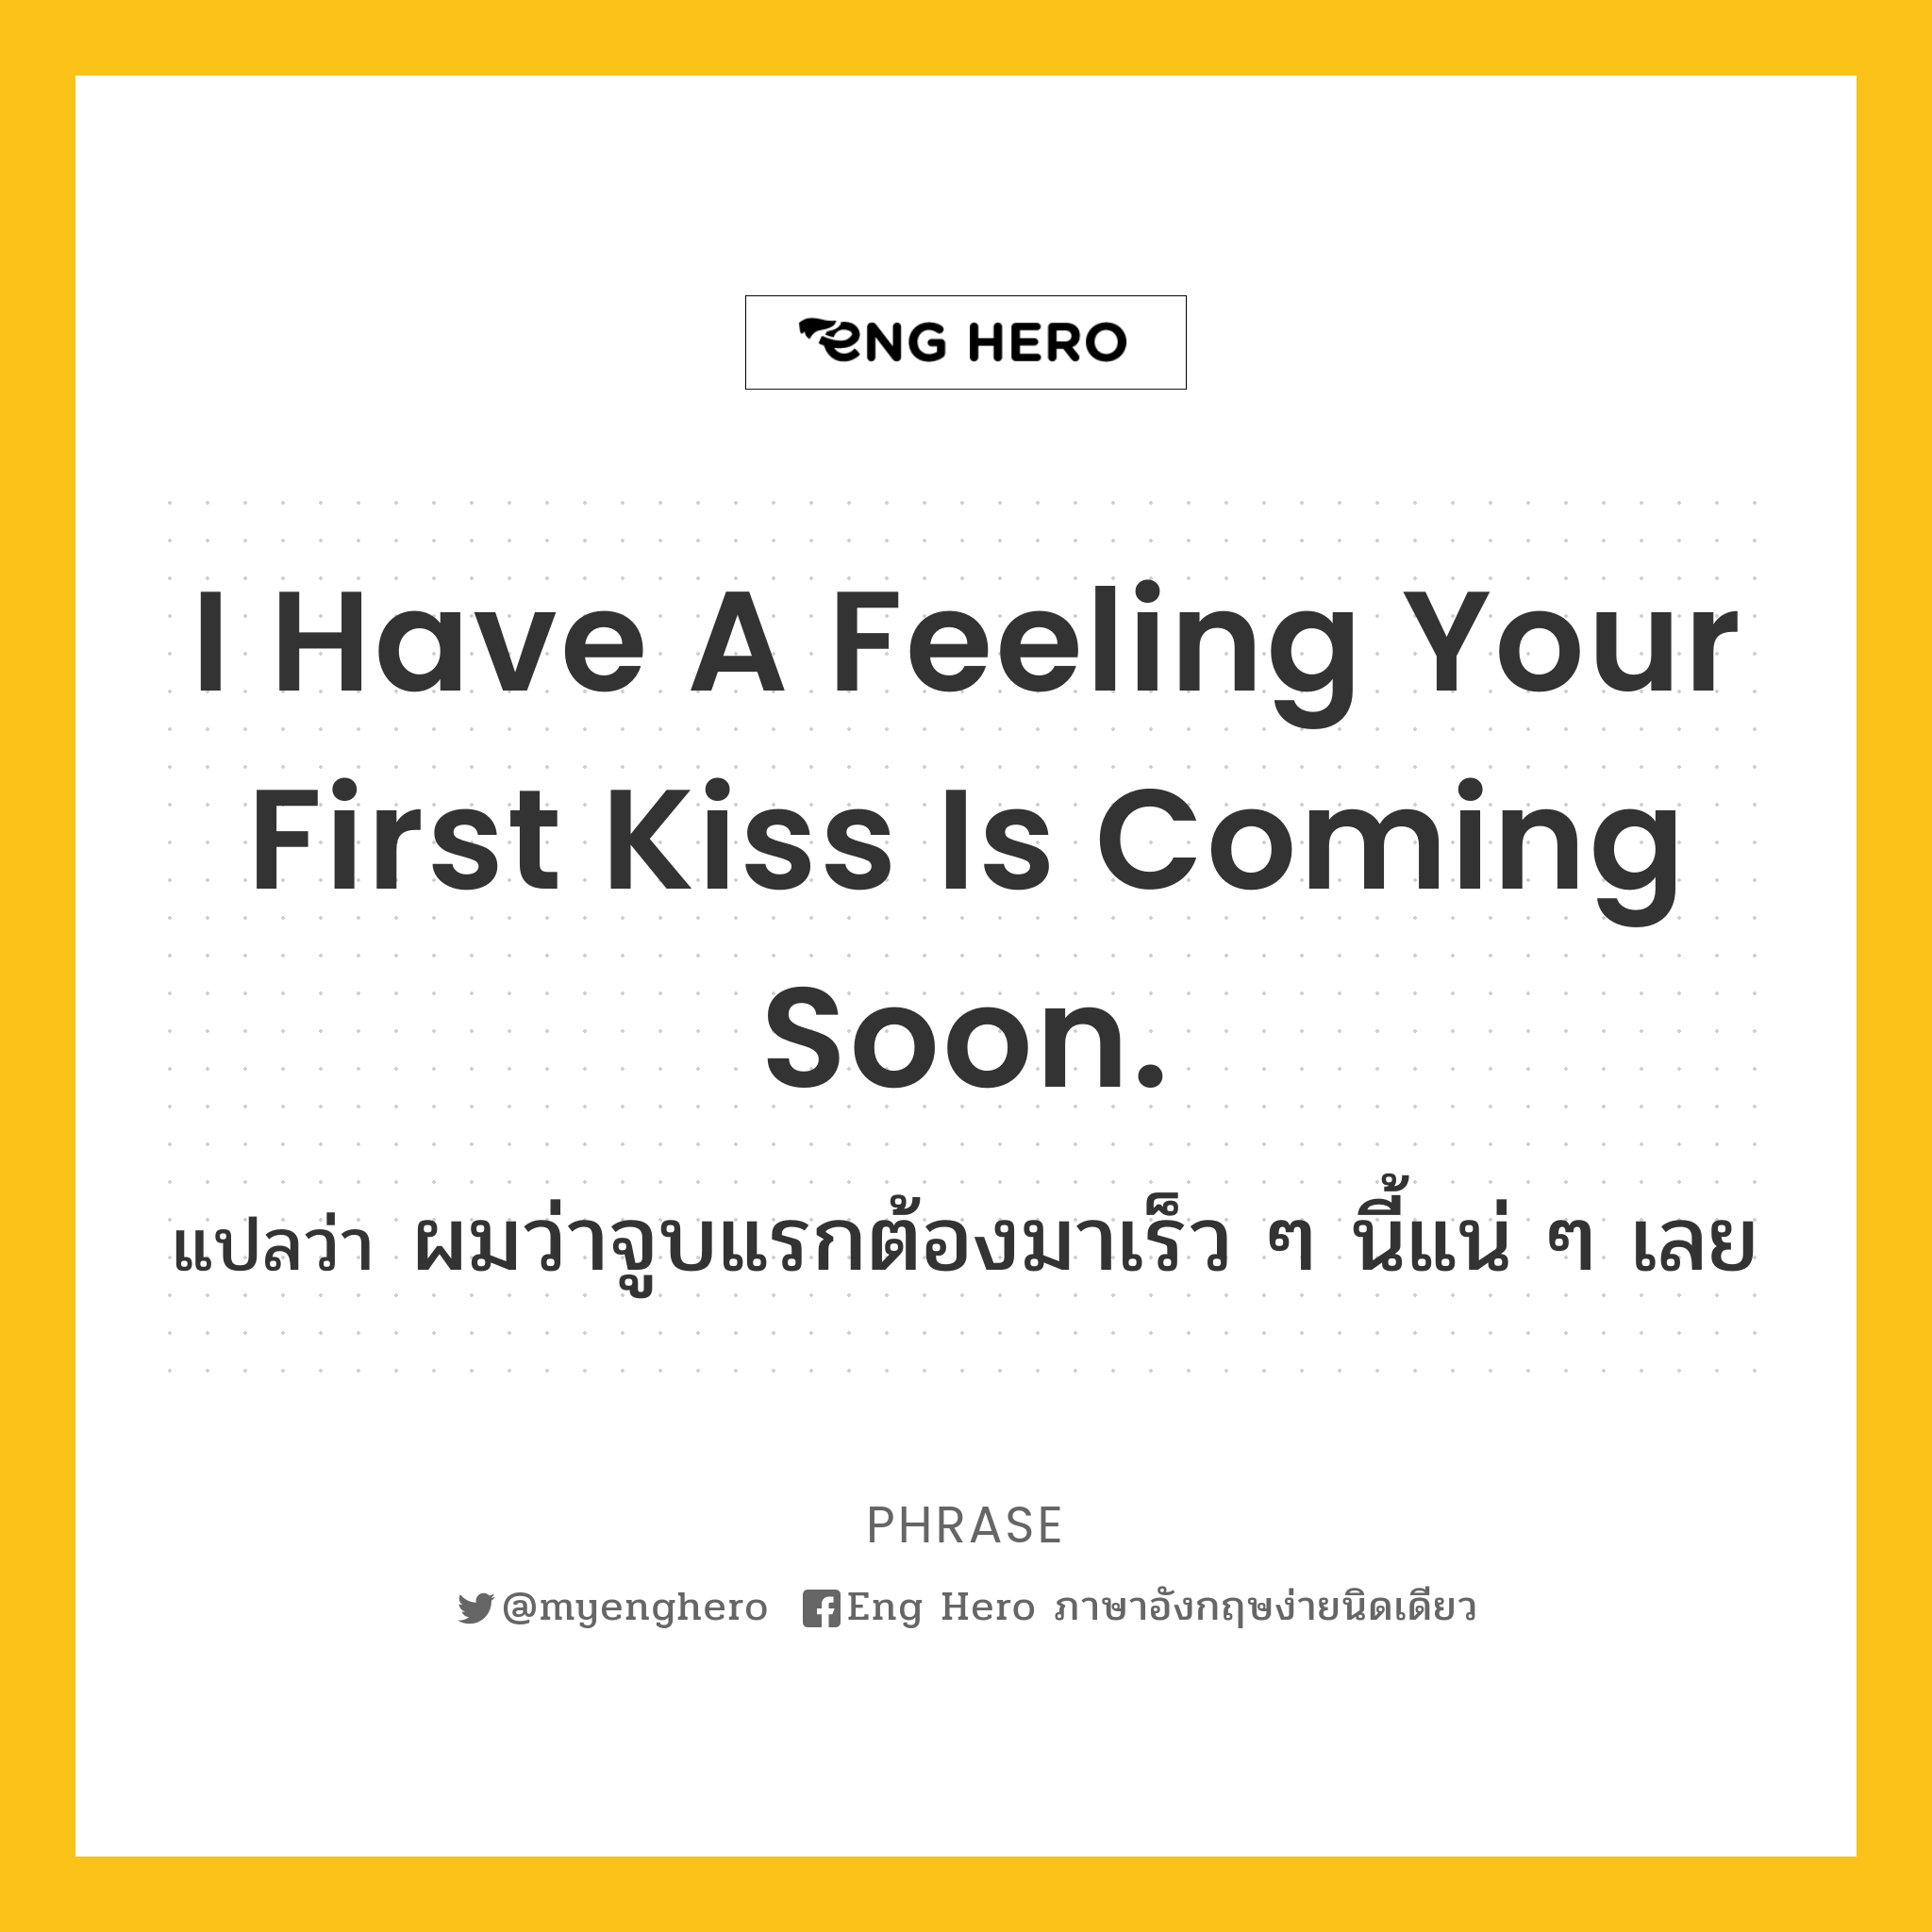 I have a feeling your first kiss is coming soon.